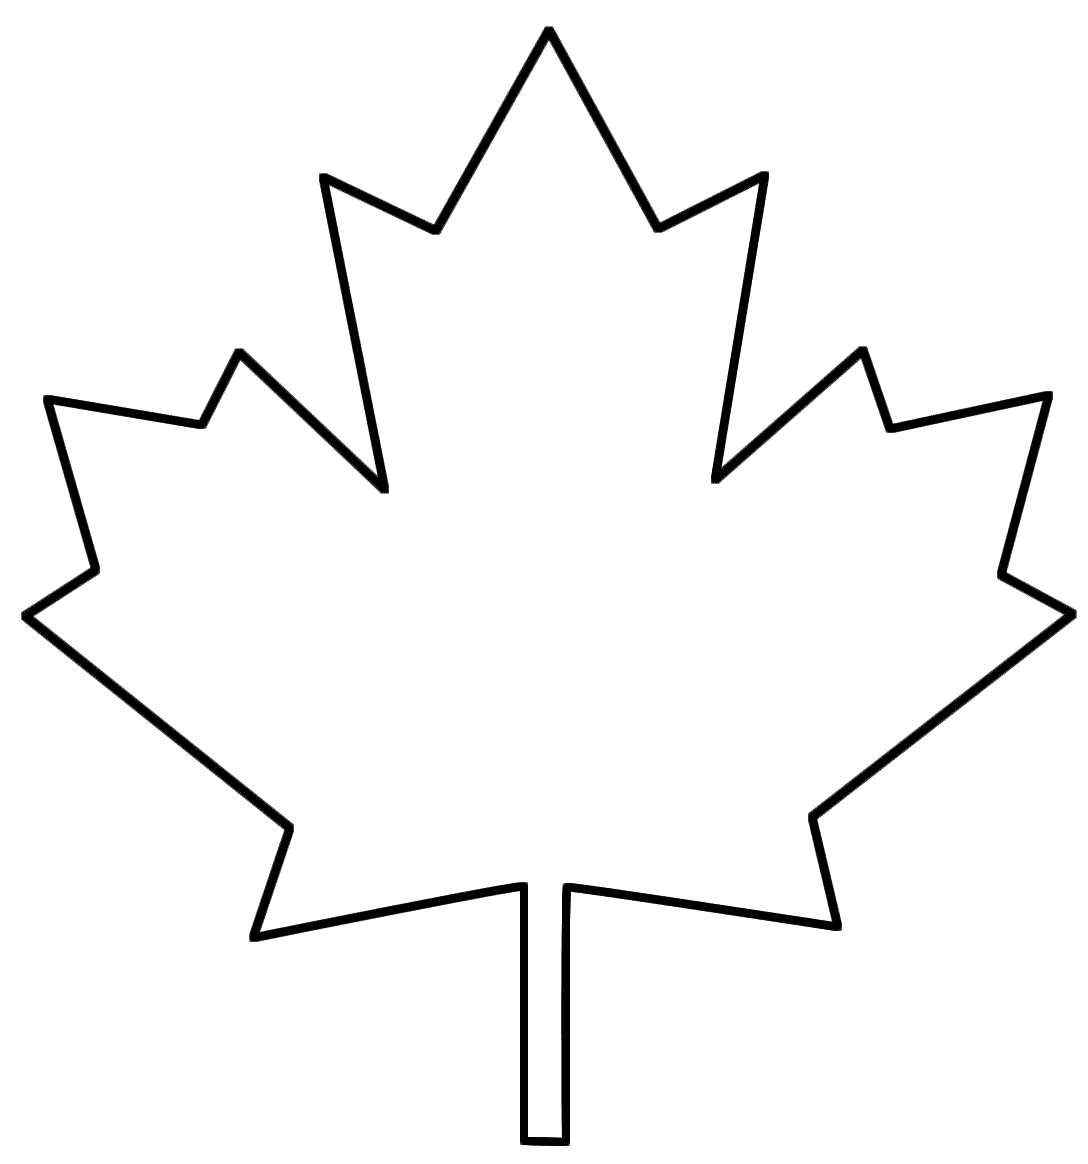 How To Draw A Canadian Maple Leaf - ClipArt Best